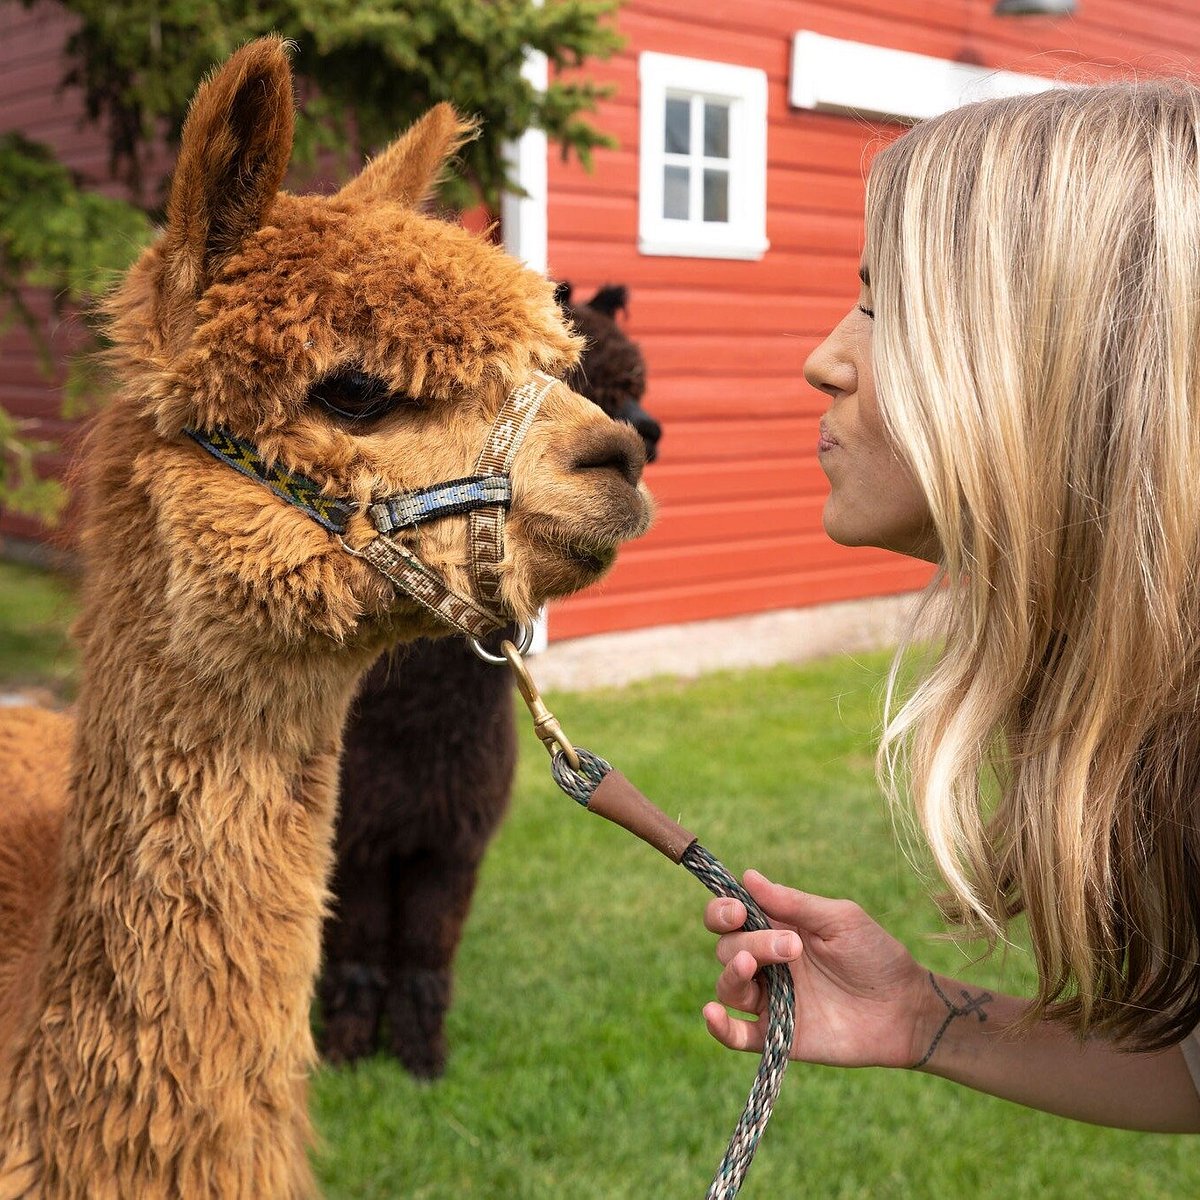 You Can Feed Adorable Baby Alpacas at This Hotel In Peru